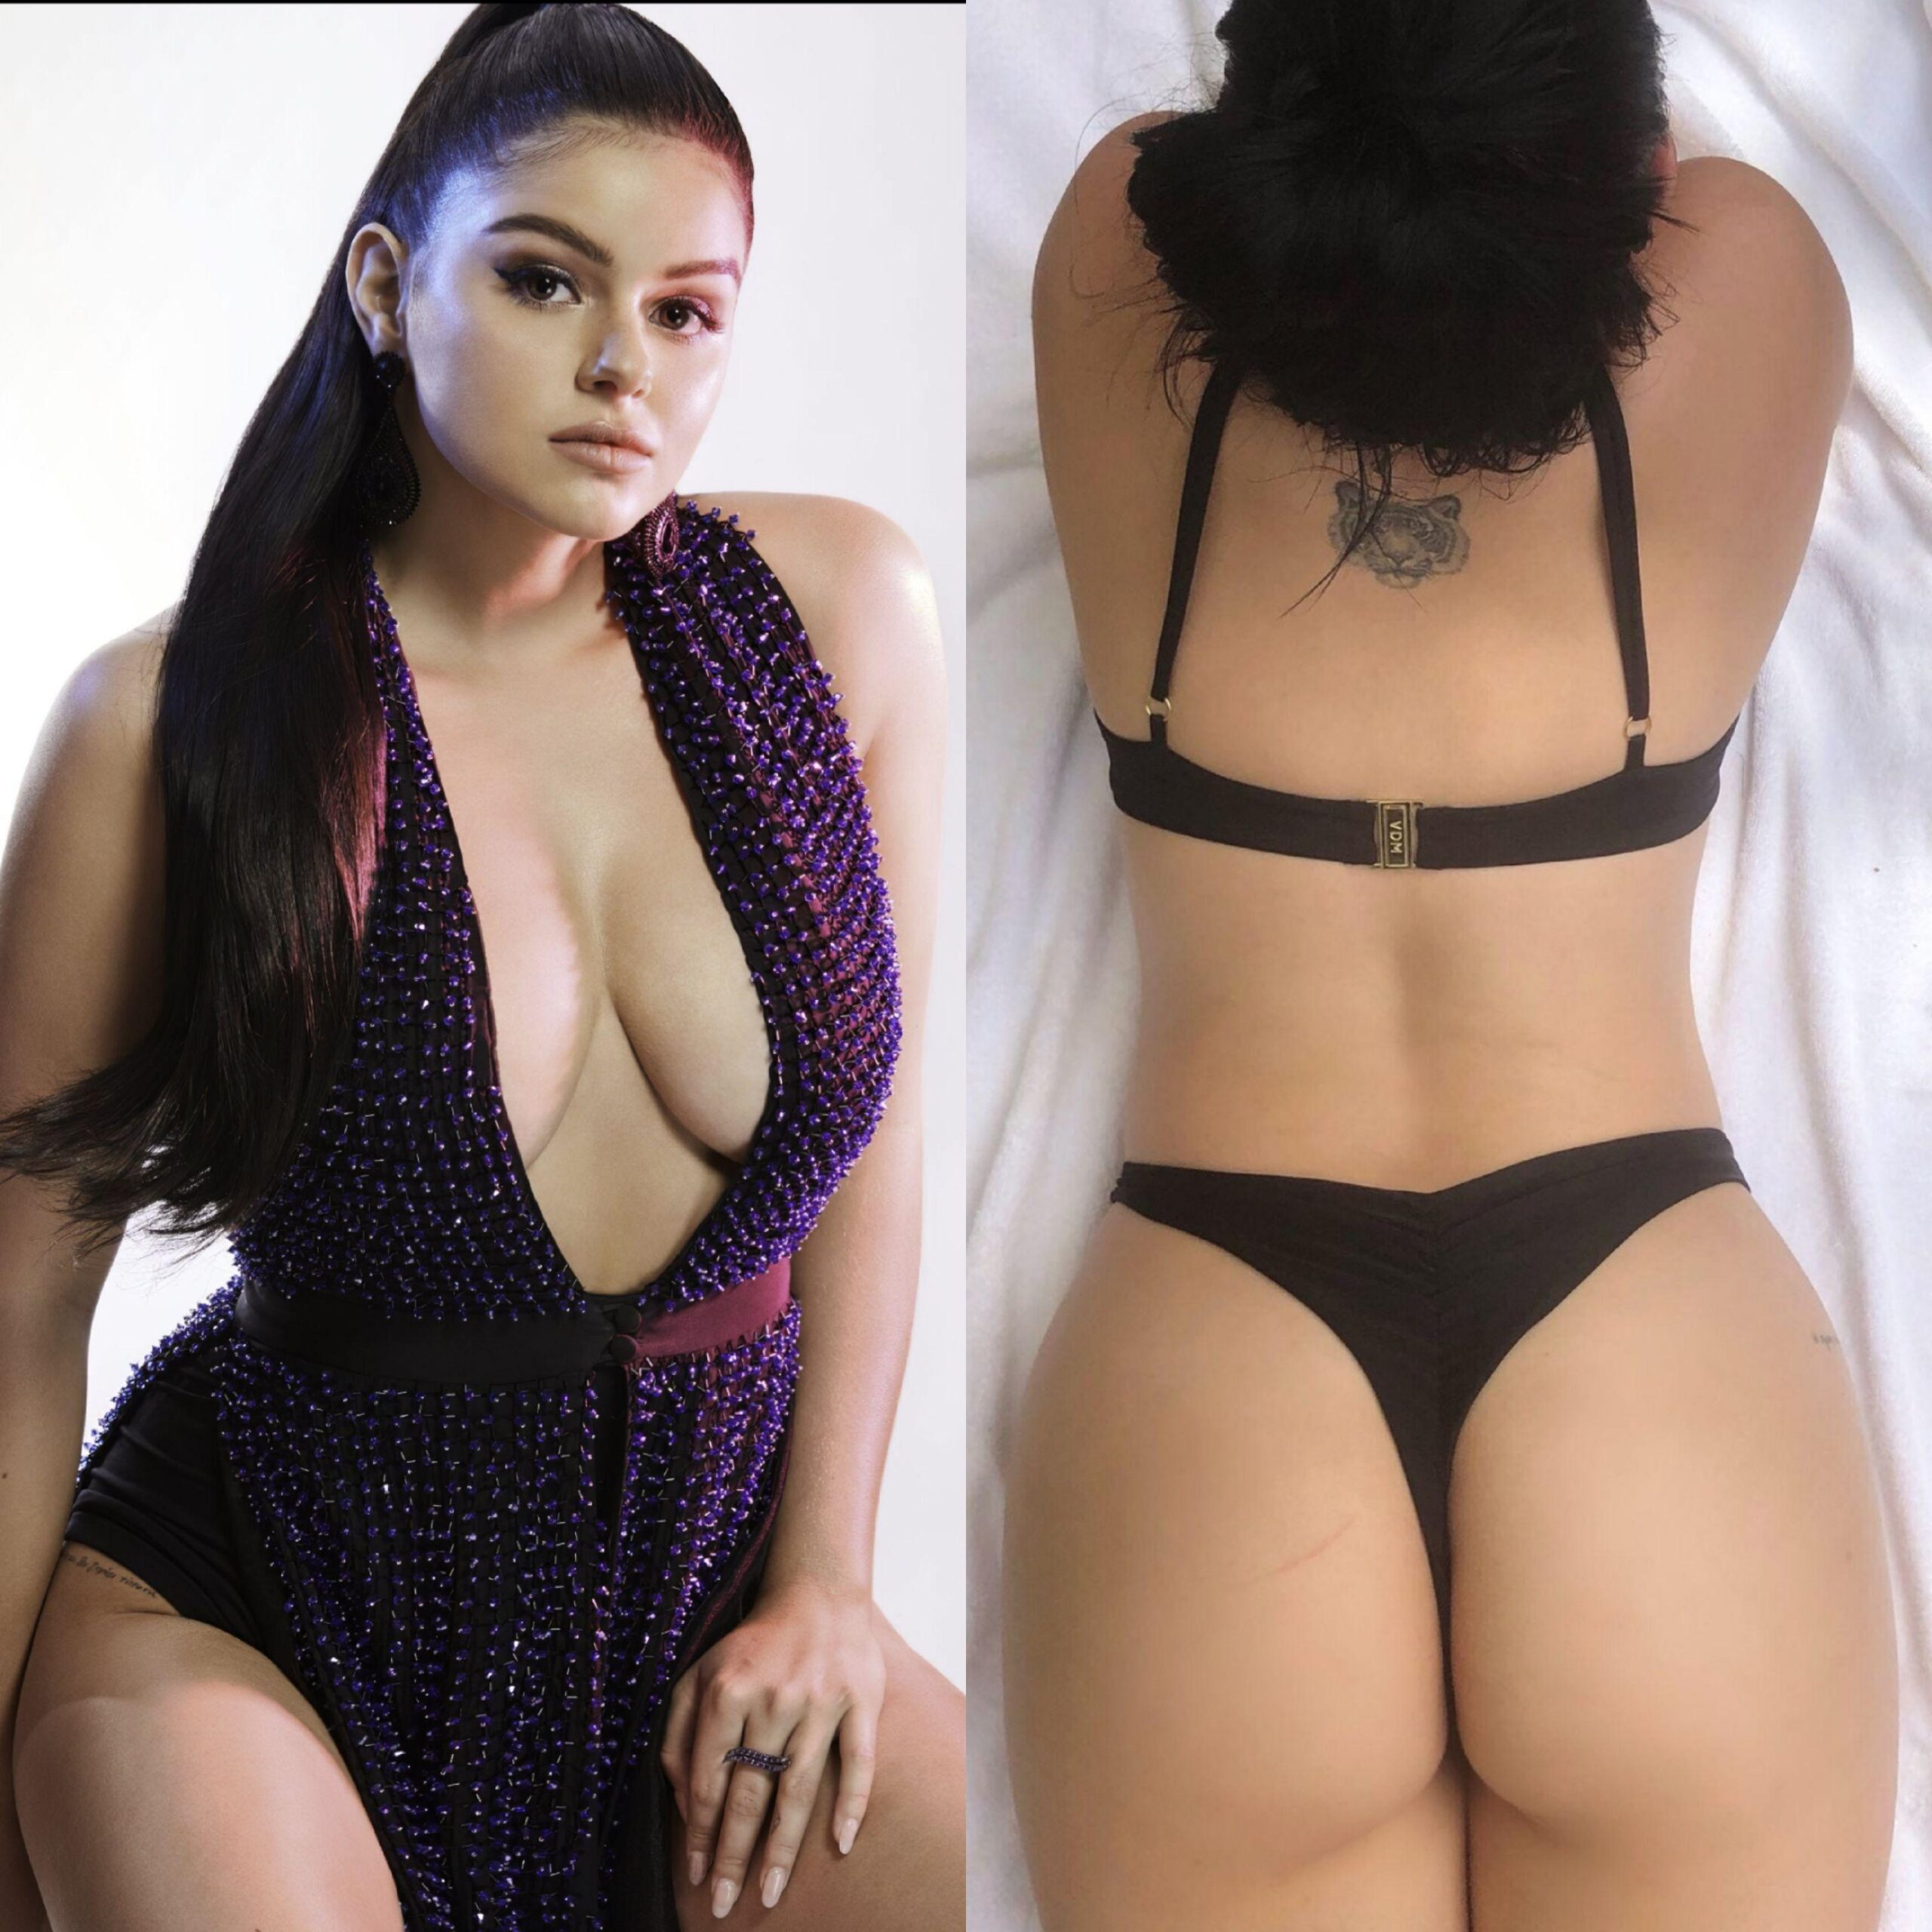 Ariel Winter's Sexiest Plunging Outfits: Photos Of The Looks